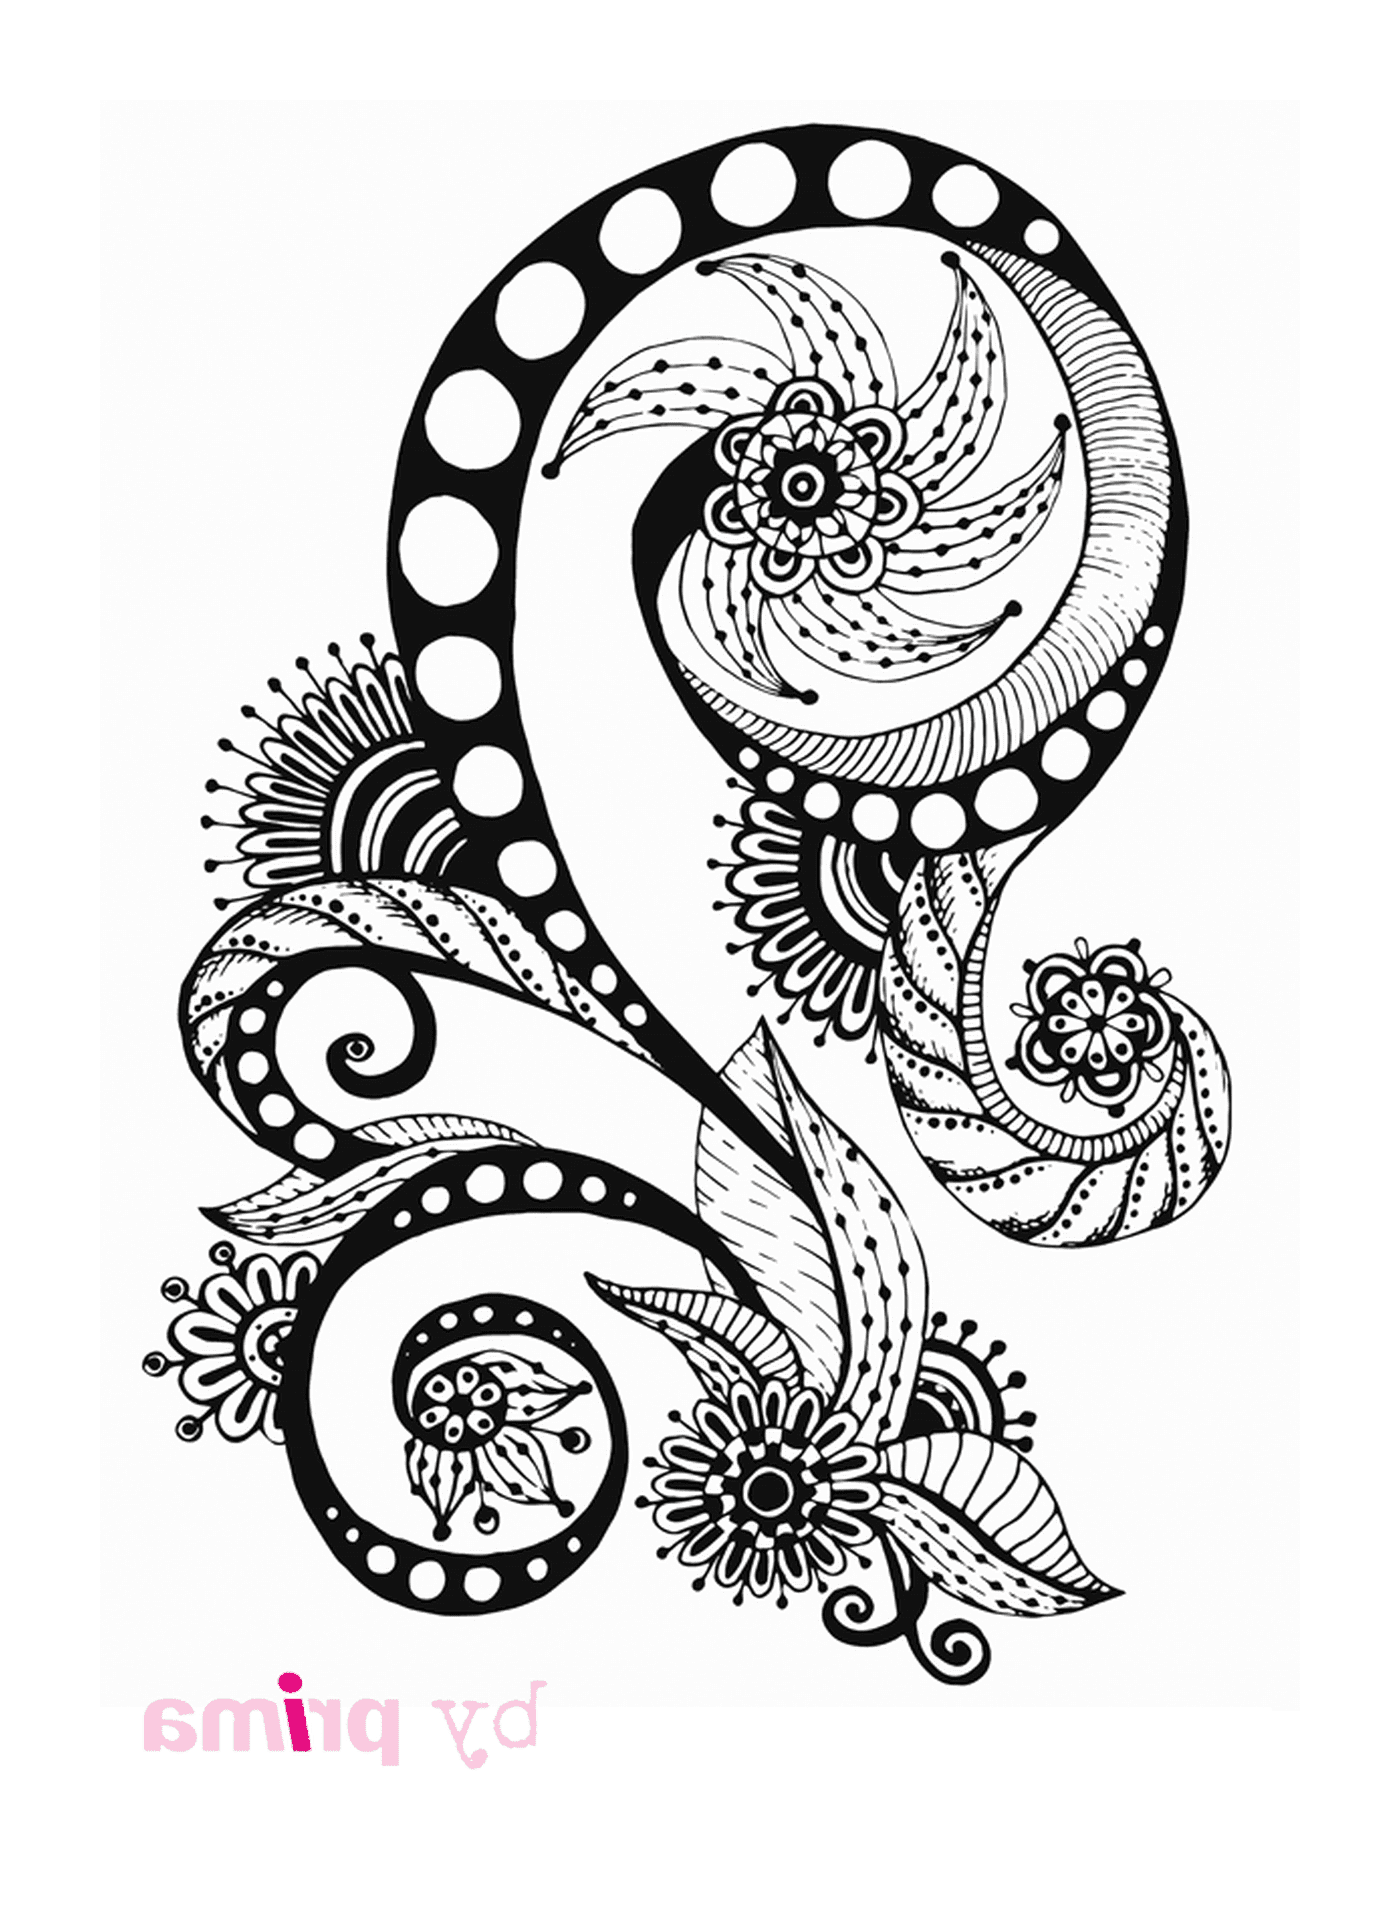  A swirling drawing with dots and spirals 